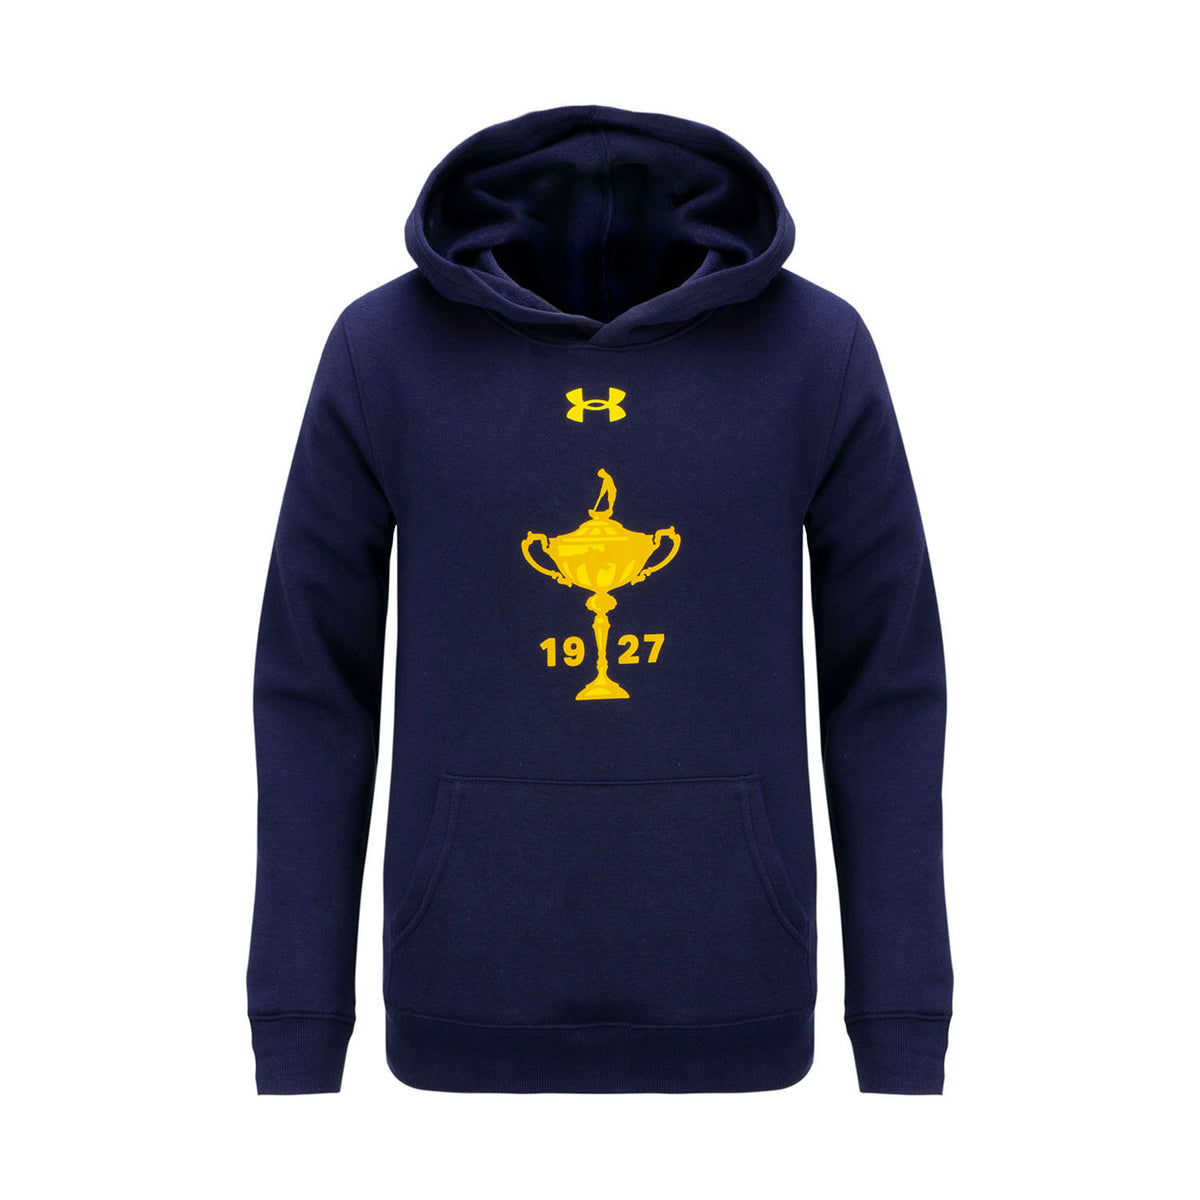 Boys Youth All Day Fleece Hoodie - Navy- Front View